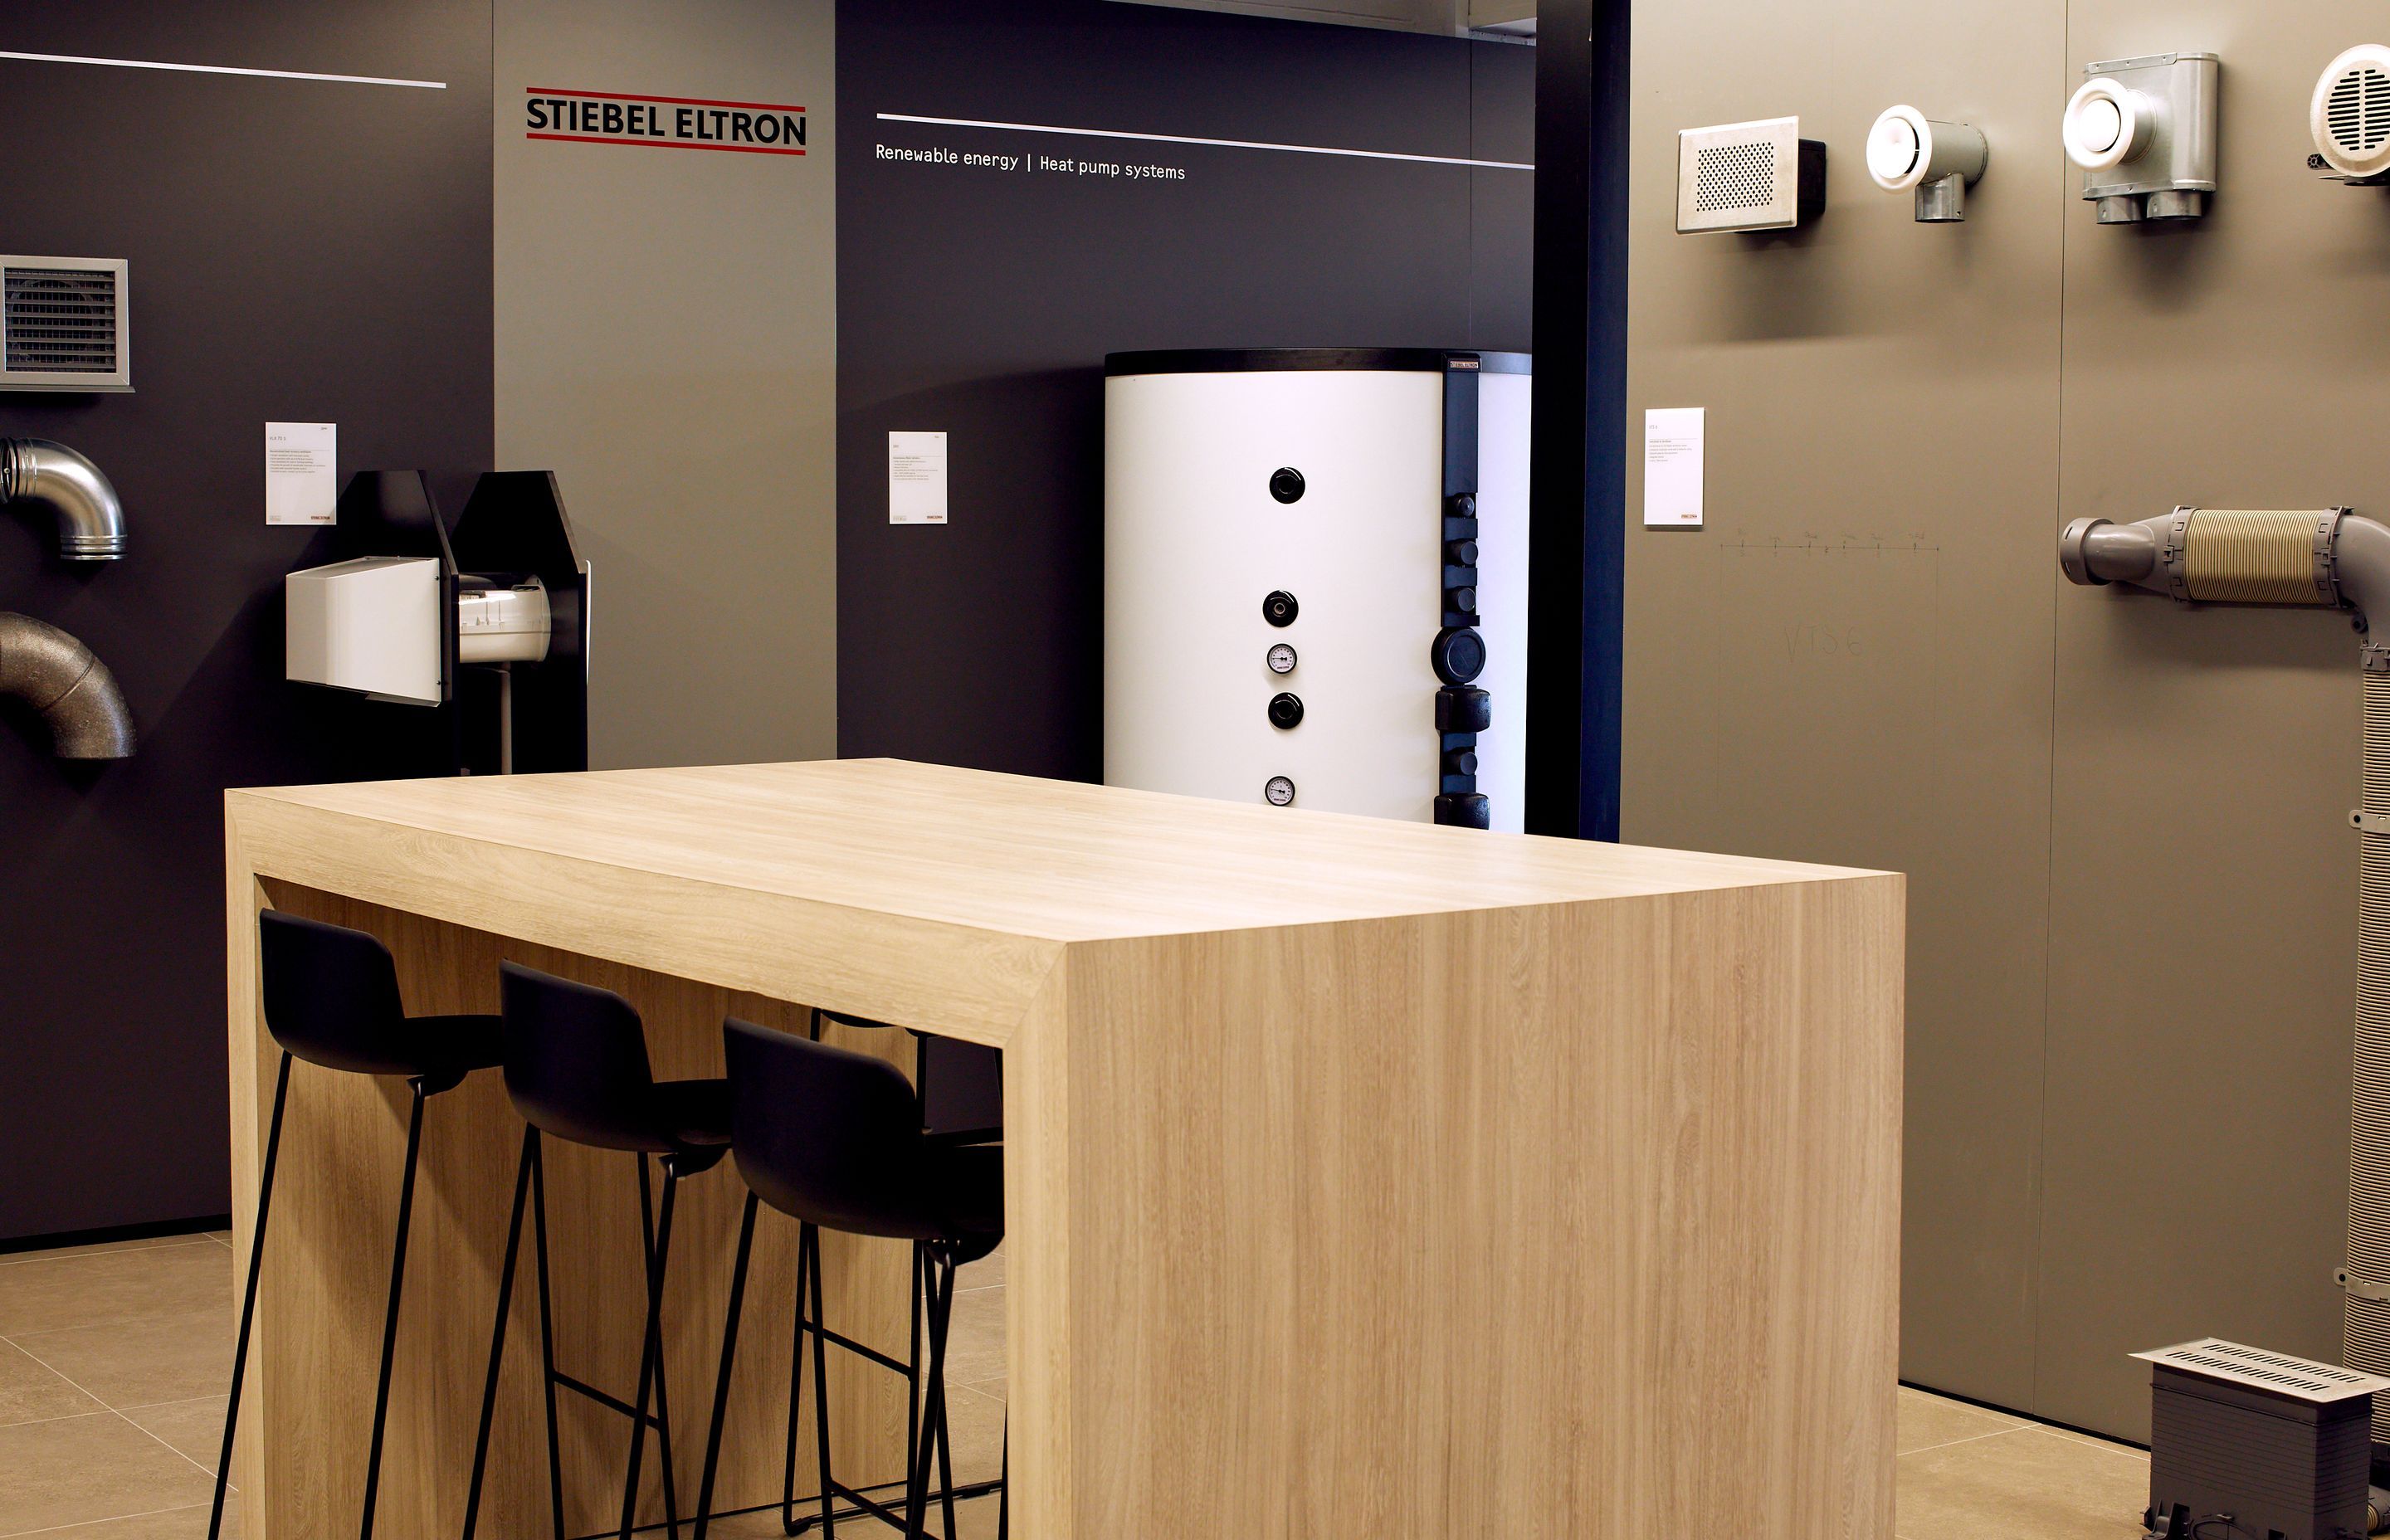 Stiebel Eltron's new showroom is the next step in its growth in New Zealand.